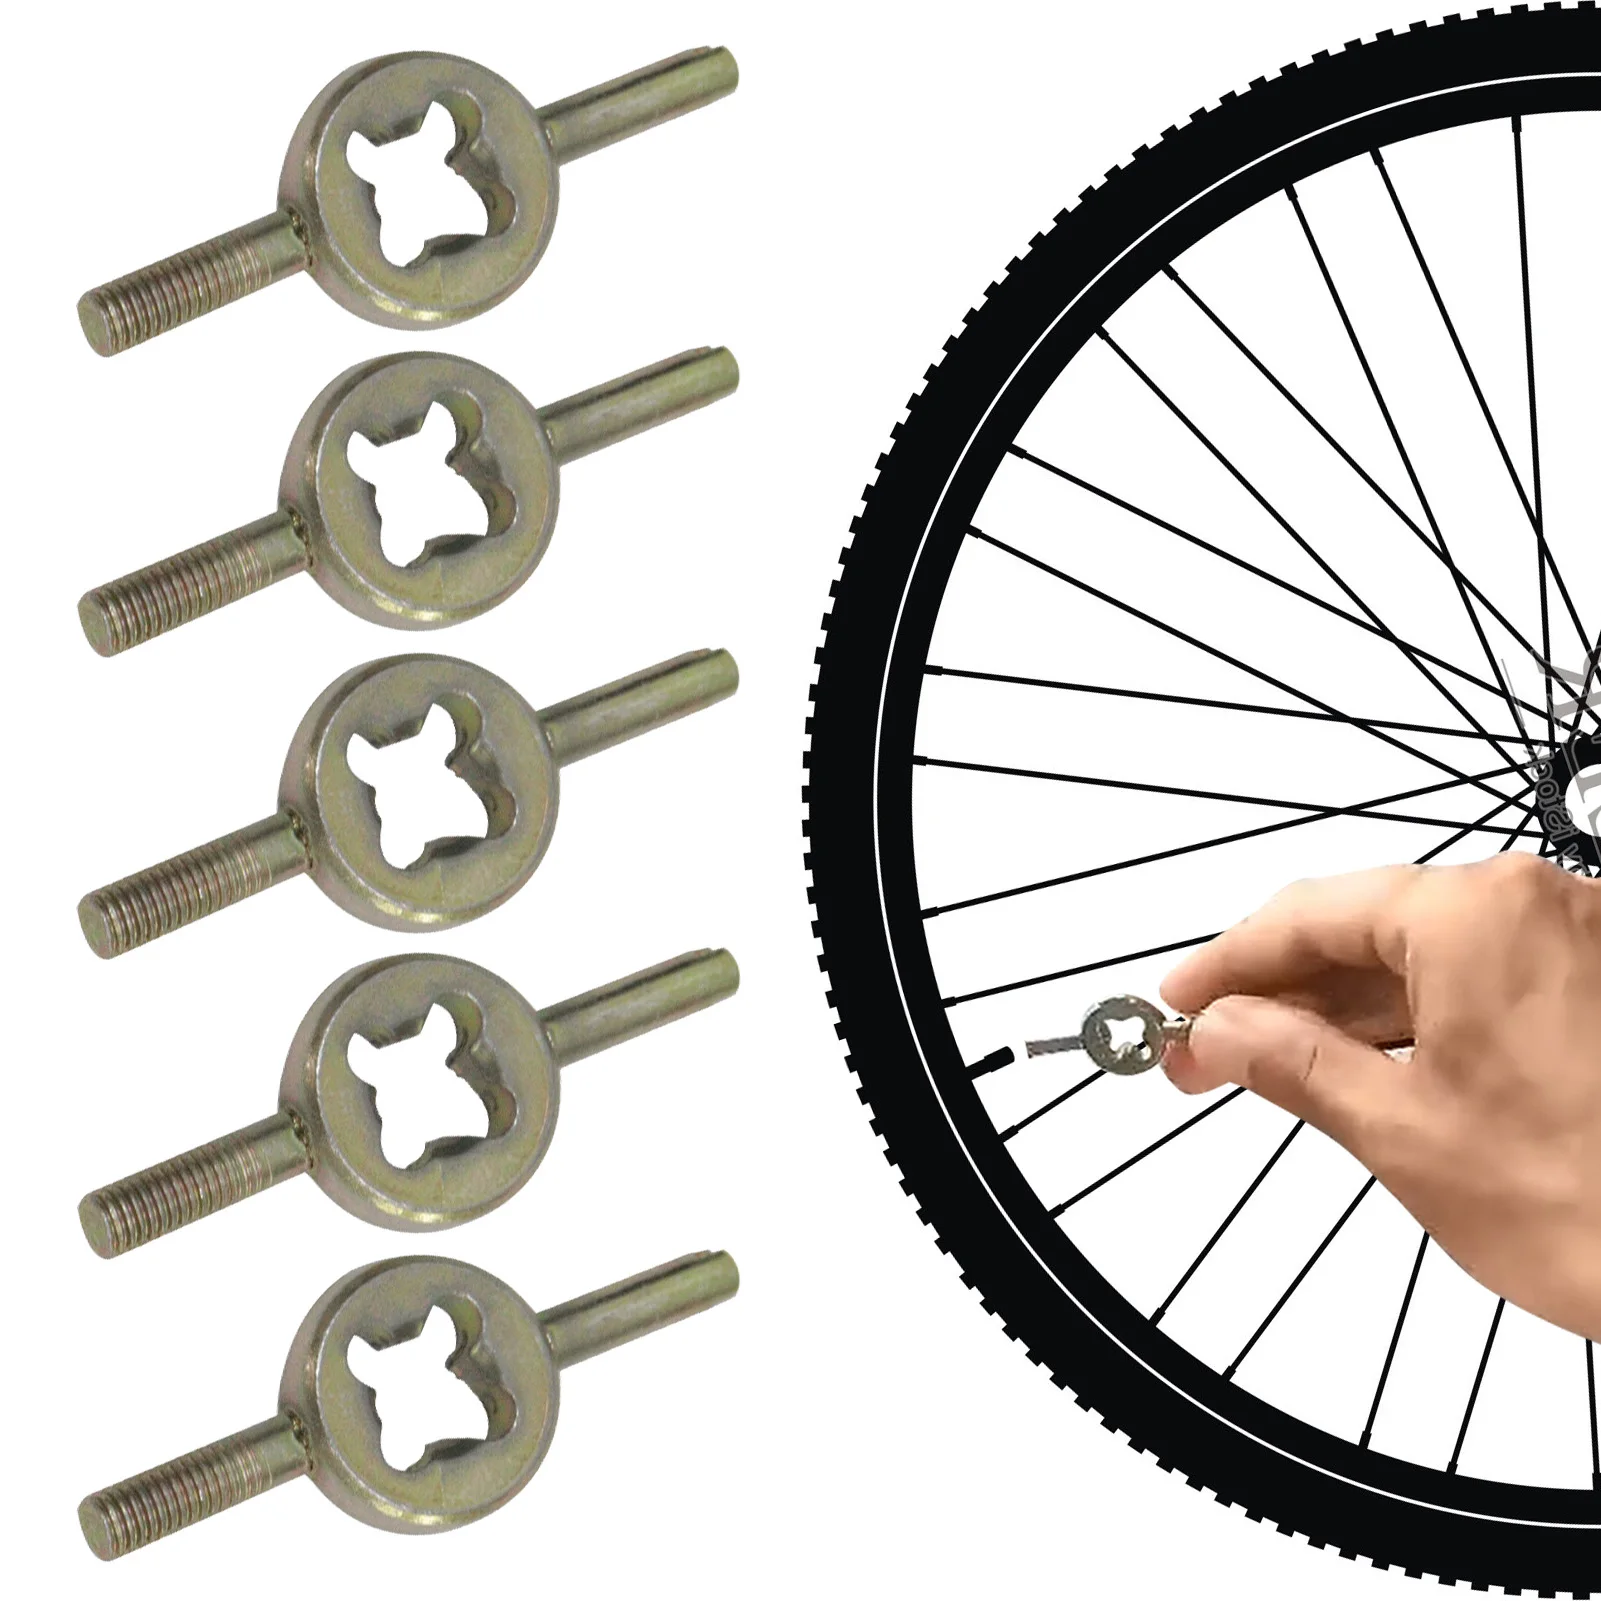 

5pcs Bicycle Valve Core Wrench Key Motorcycle American Valve Inner Tube Wrench Adjustment And Deflation Tool